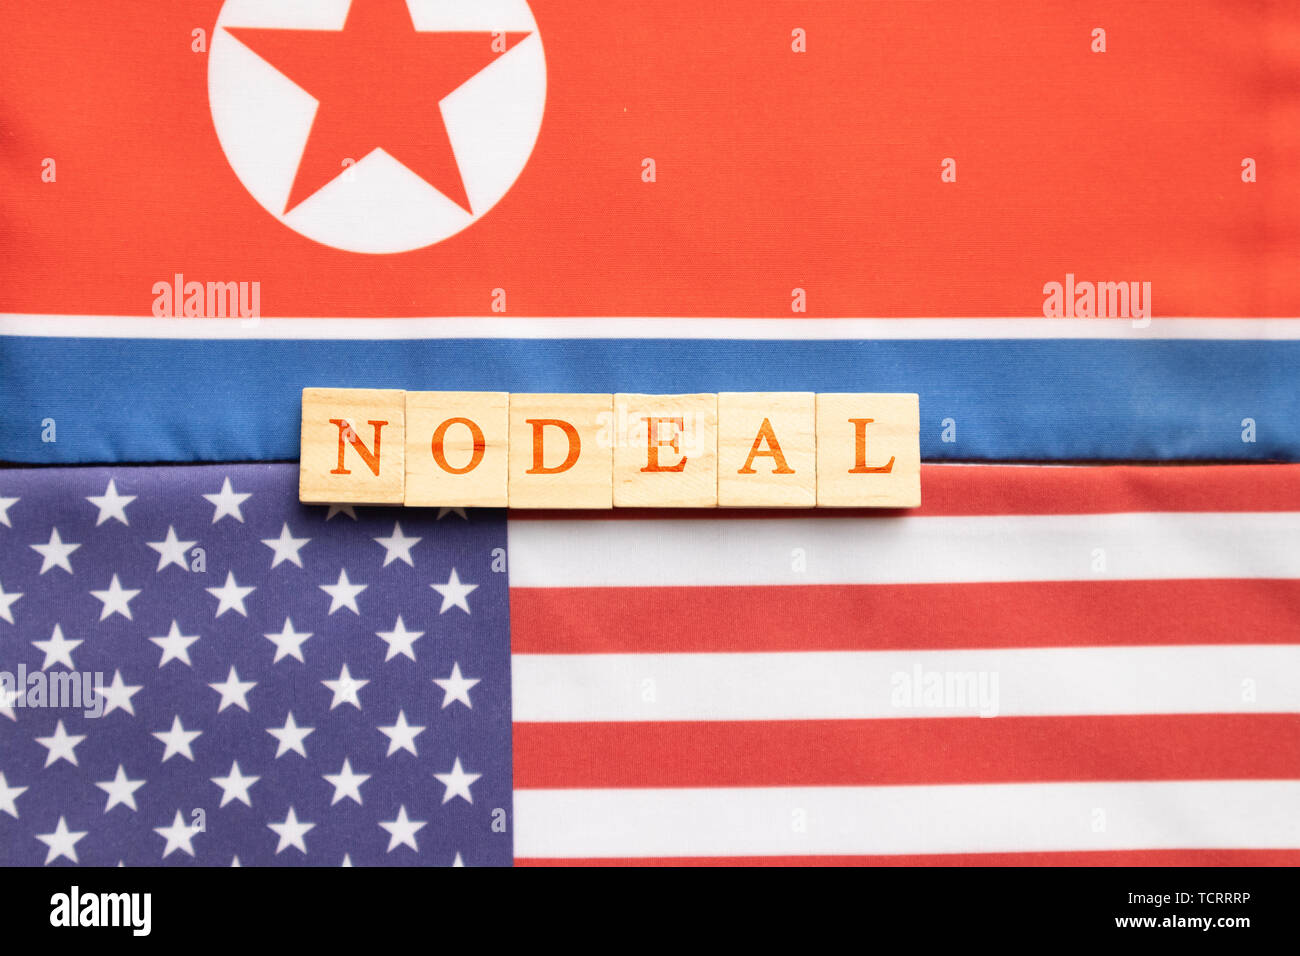 Concept of bilateral relations of USA and North Korea showing with flag and Nodeal in wooden block letters Stock Photo